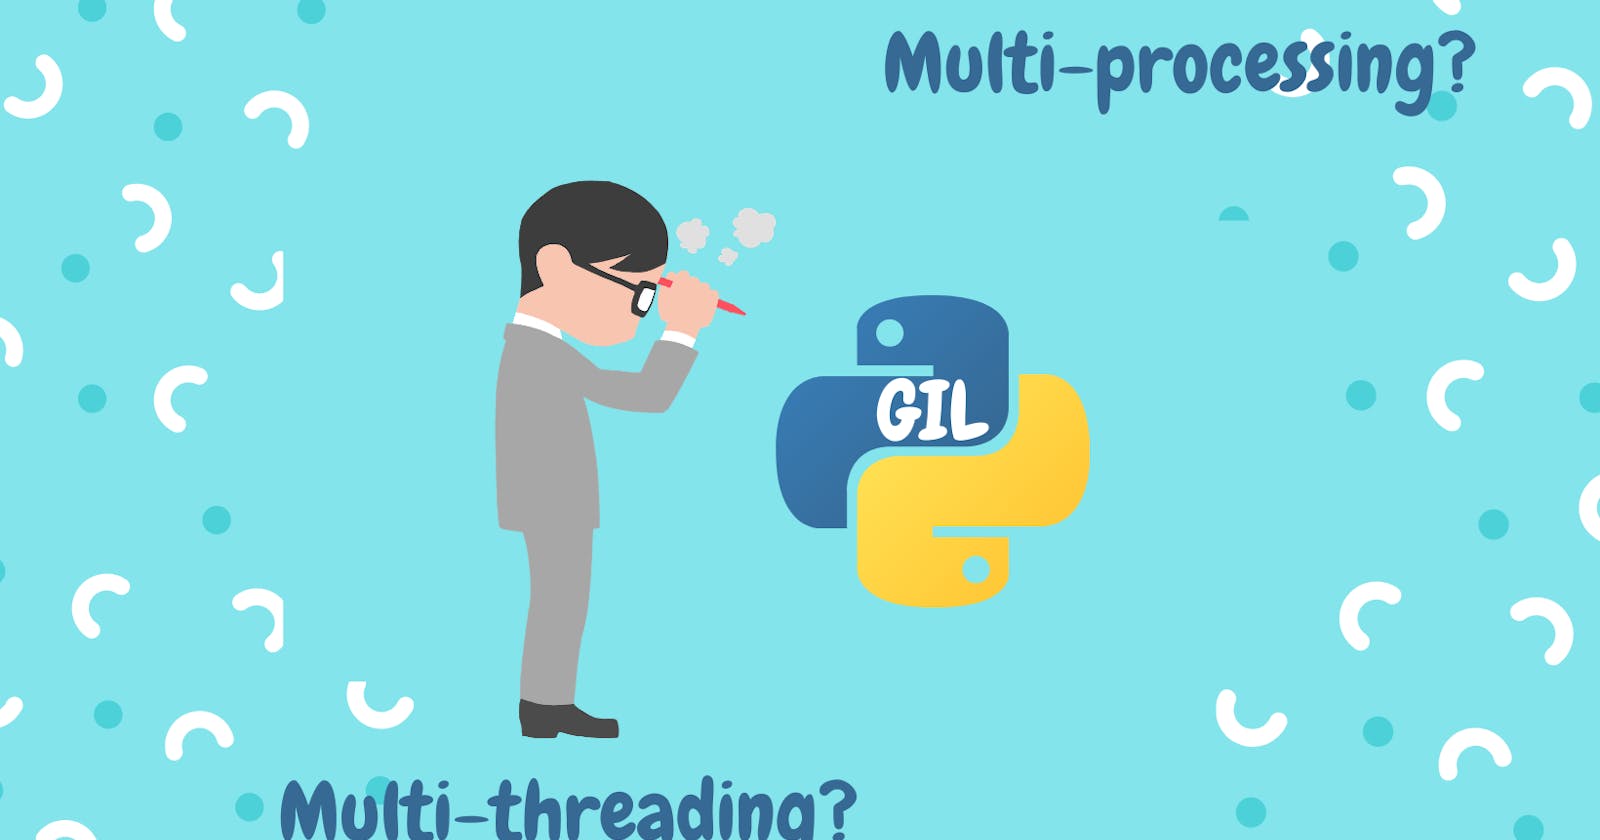 Multiprocessing, Multithreading and GIL: Essential concepts for every Python developer